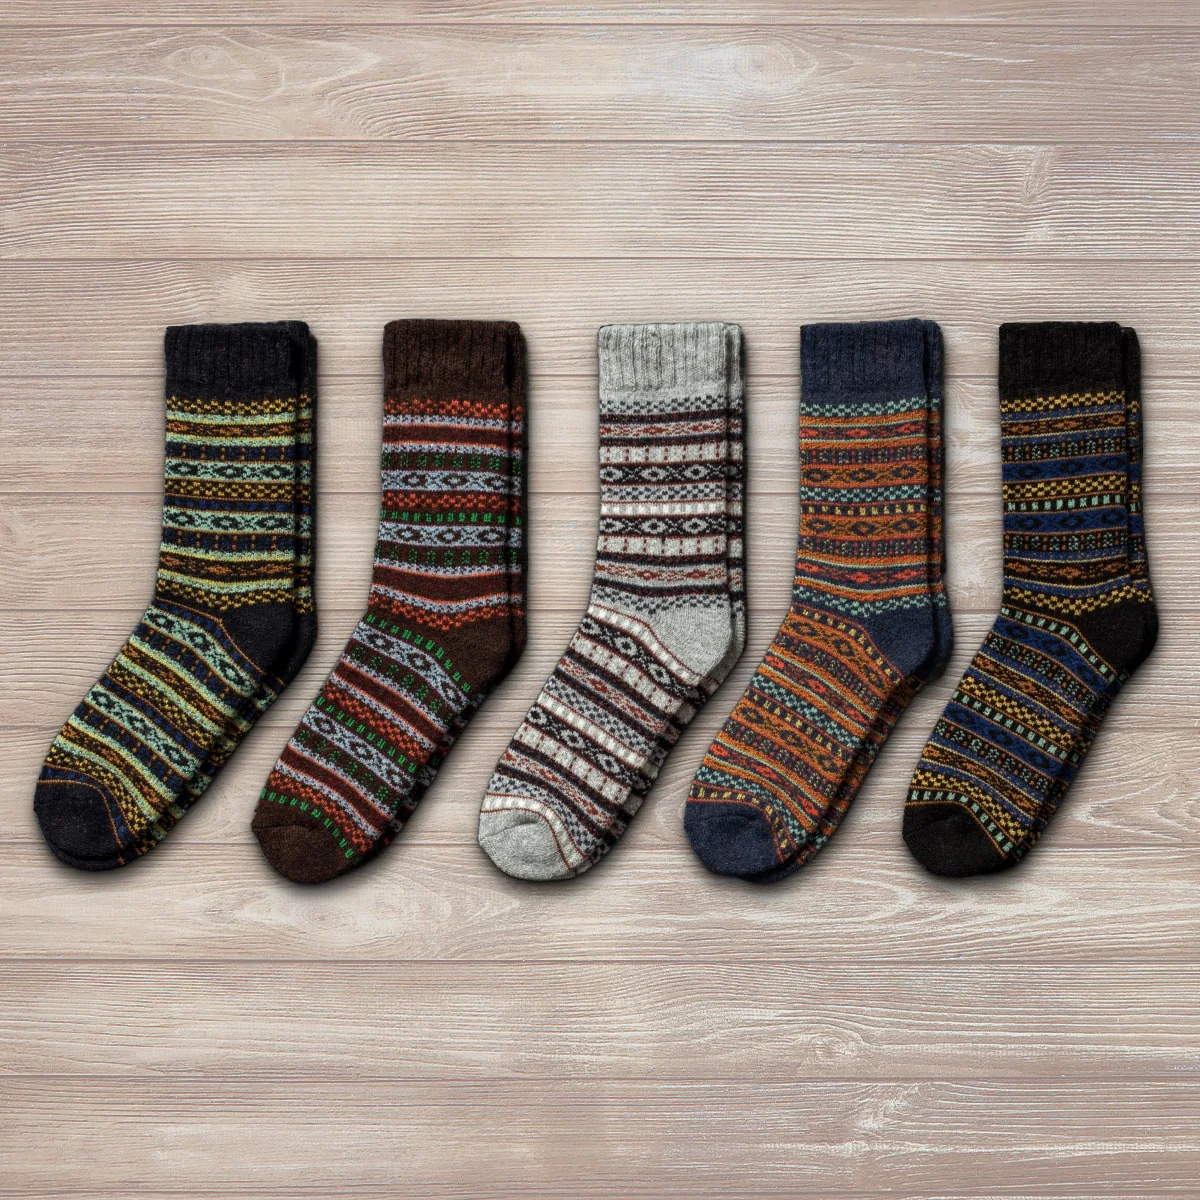 How To Experience Maximum Comfort And Quality With Arvid 5 Pairs Socks